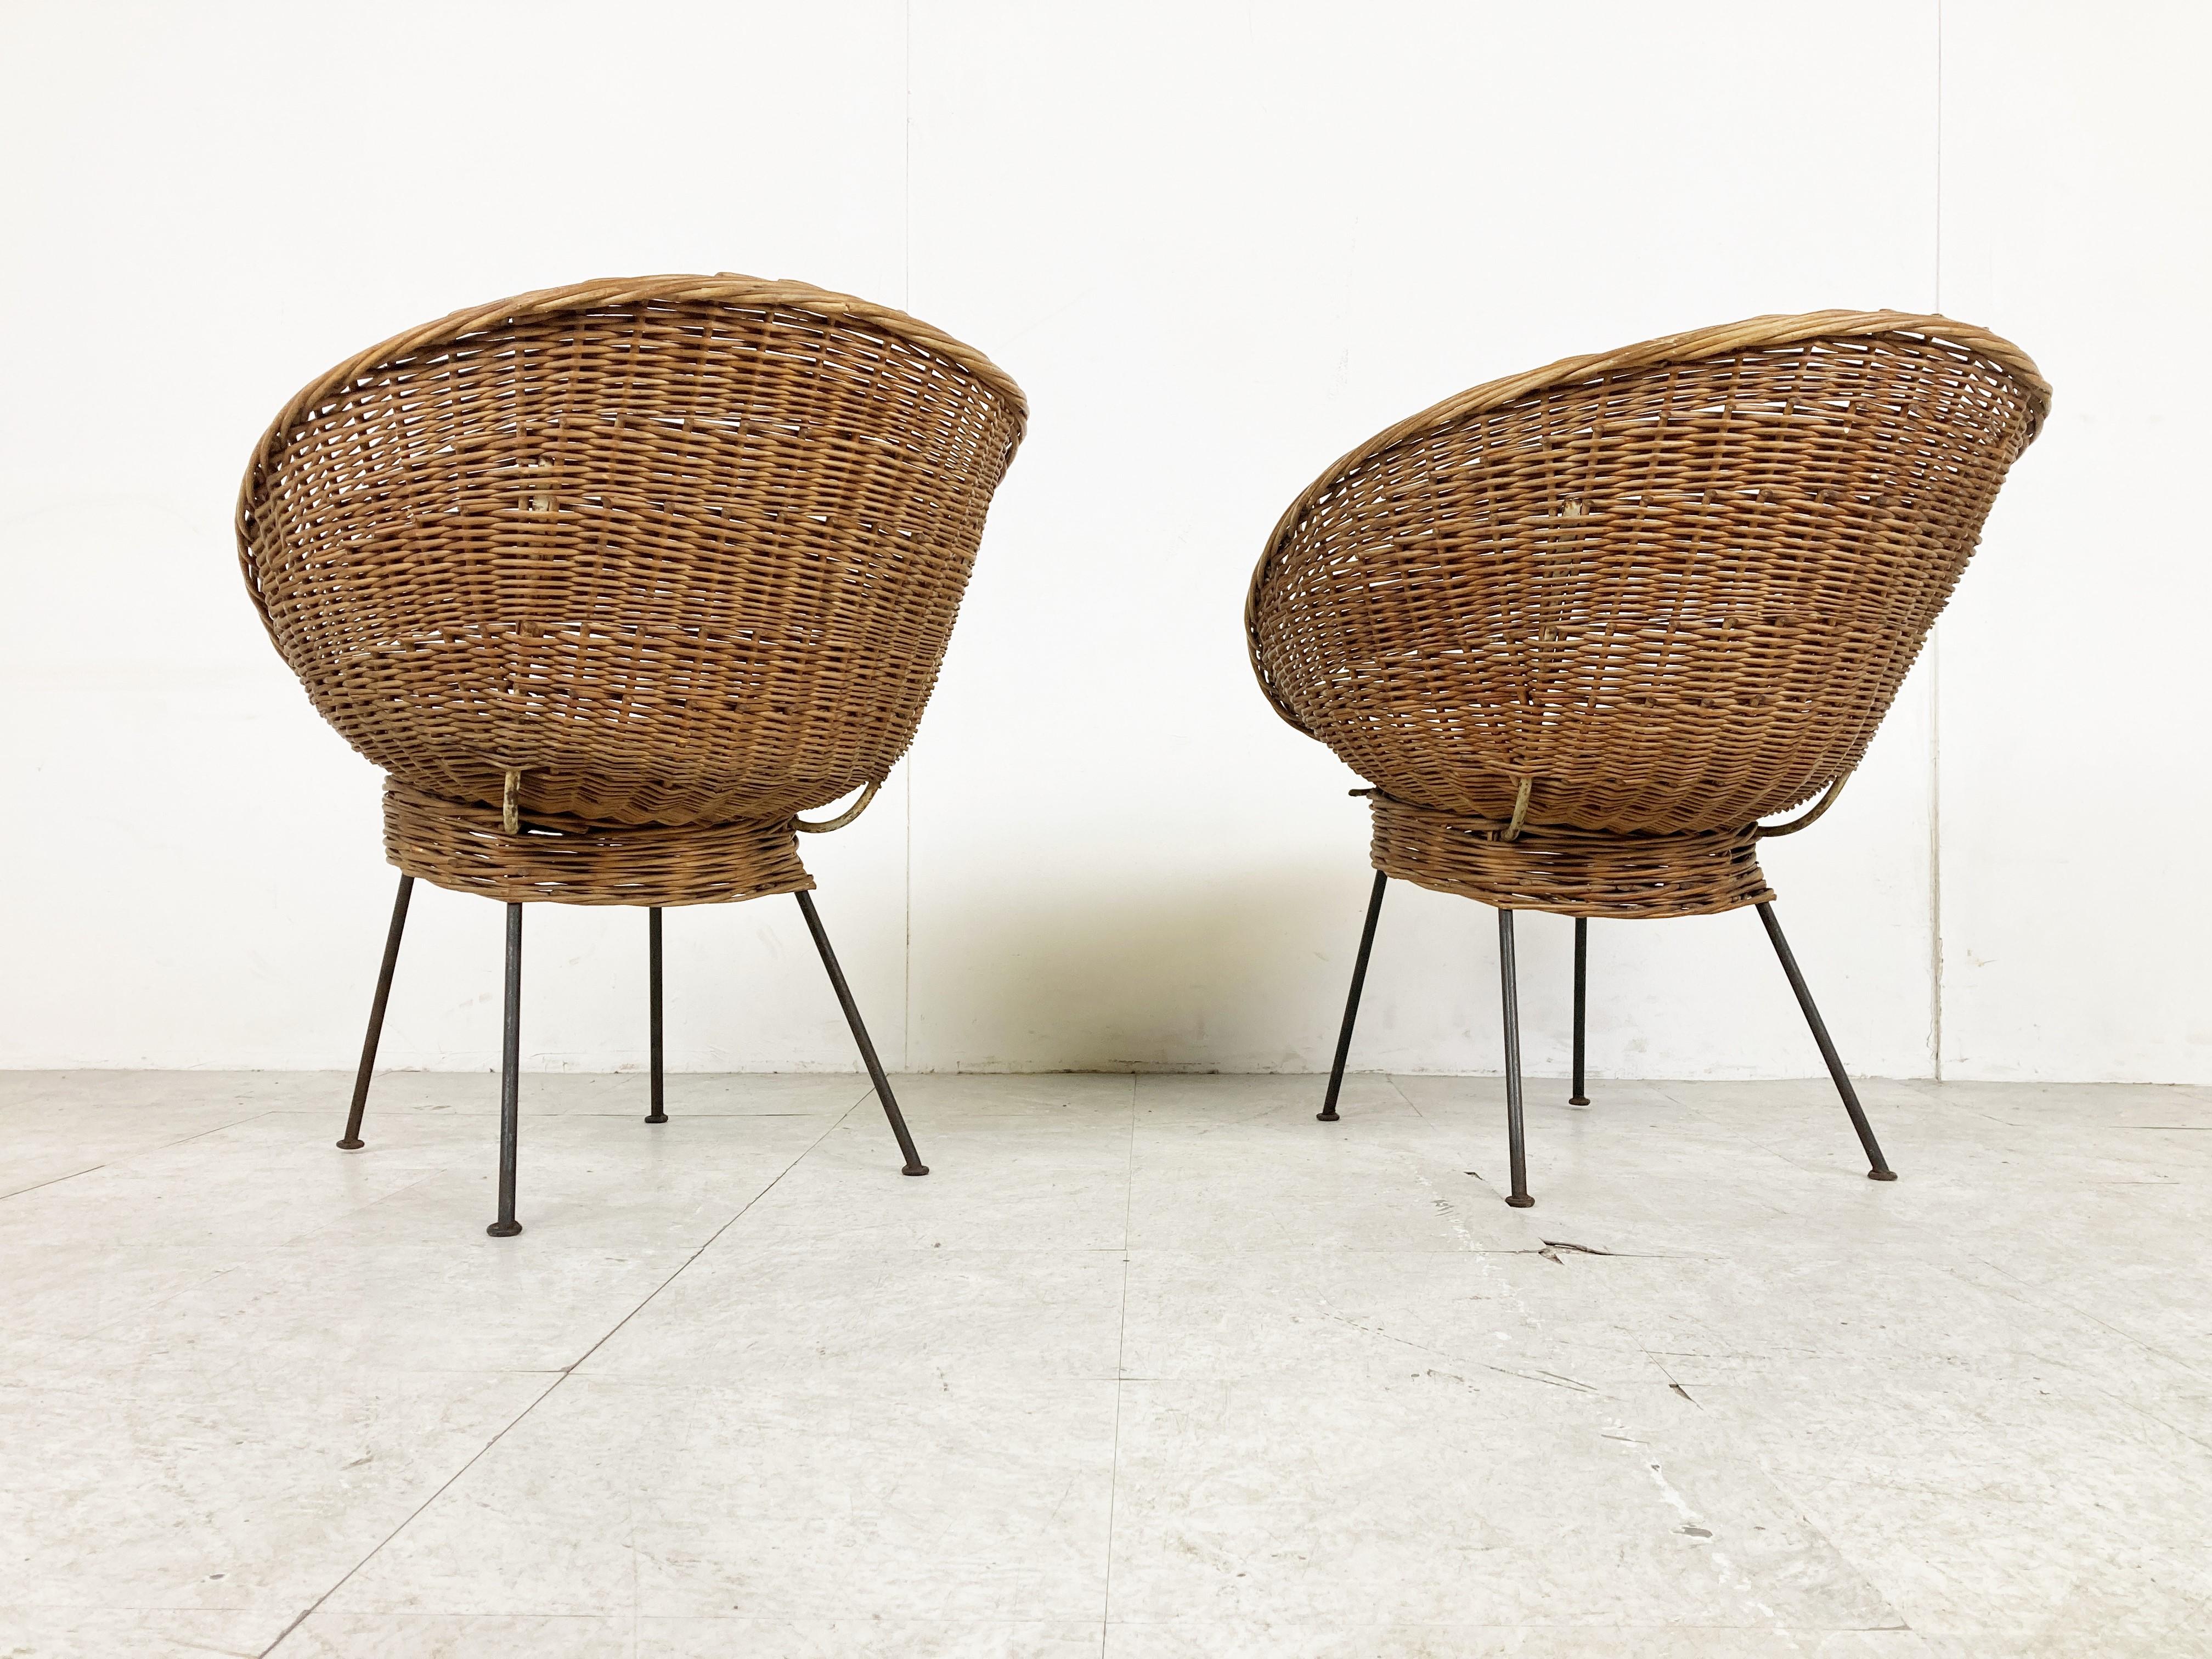 Vintage Italian Wicker Lounge Chairs, Set of 2, 1960s For Sale 4